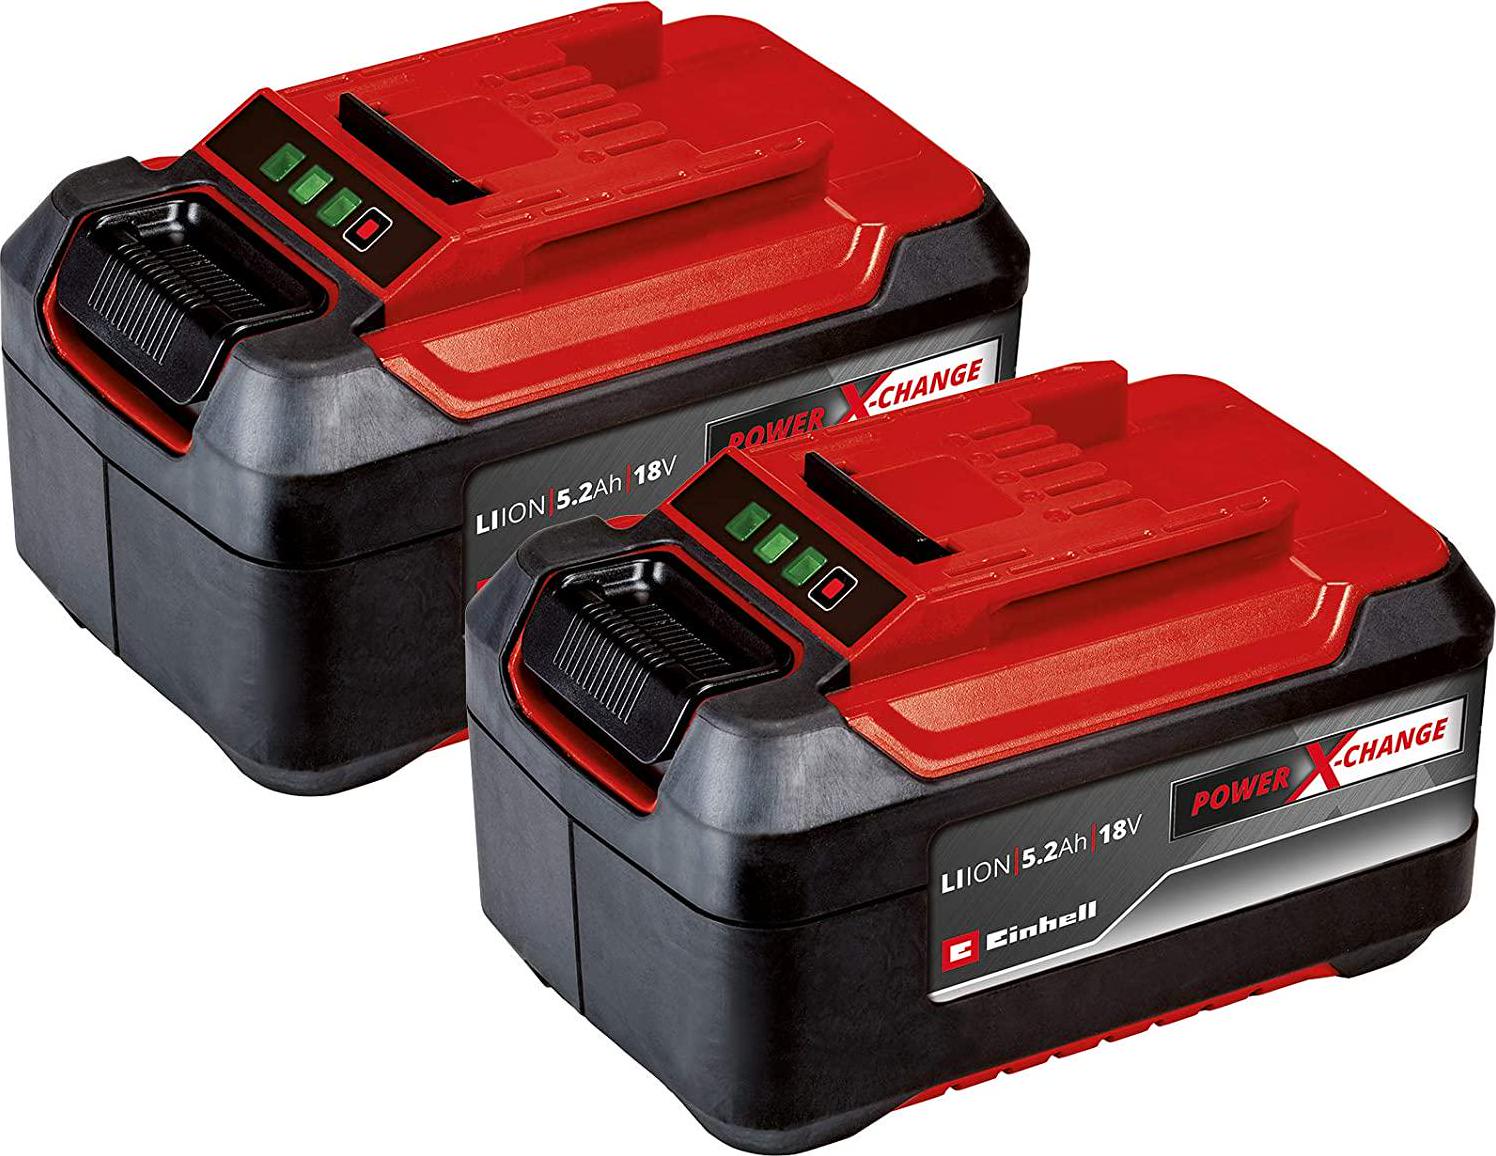 Einhell, Einhell Power X-Change 18V, 5.2Ah Lithium-Ion Battery Twin Pack 2 x 5,2Ah Batteries Universally Compatible With All PXC Power Tools And Garden Machines